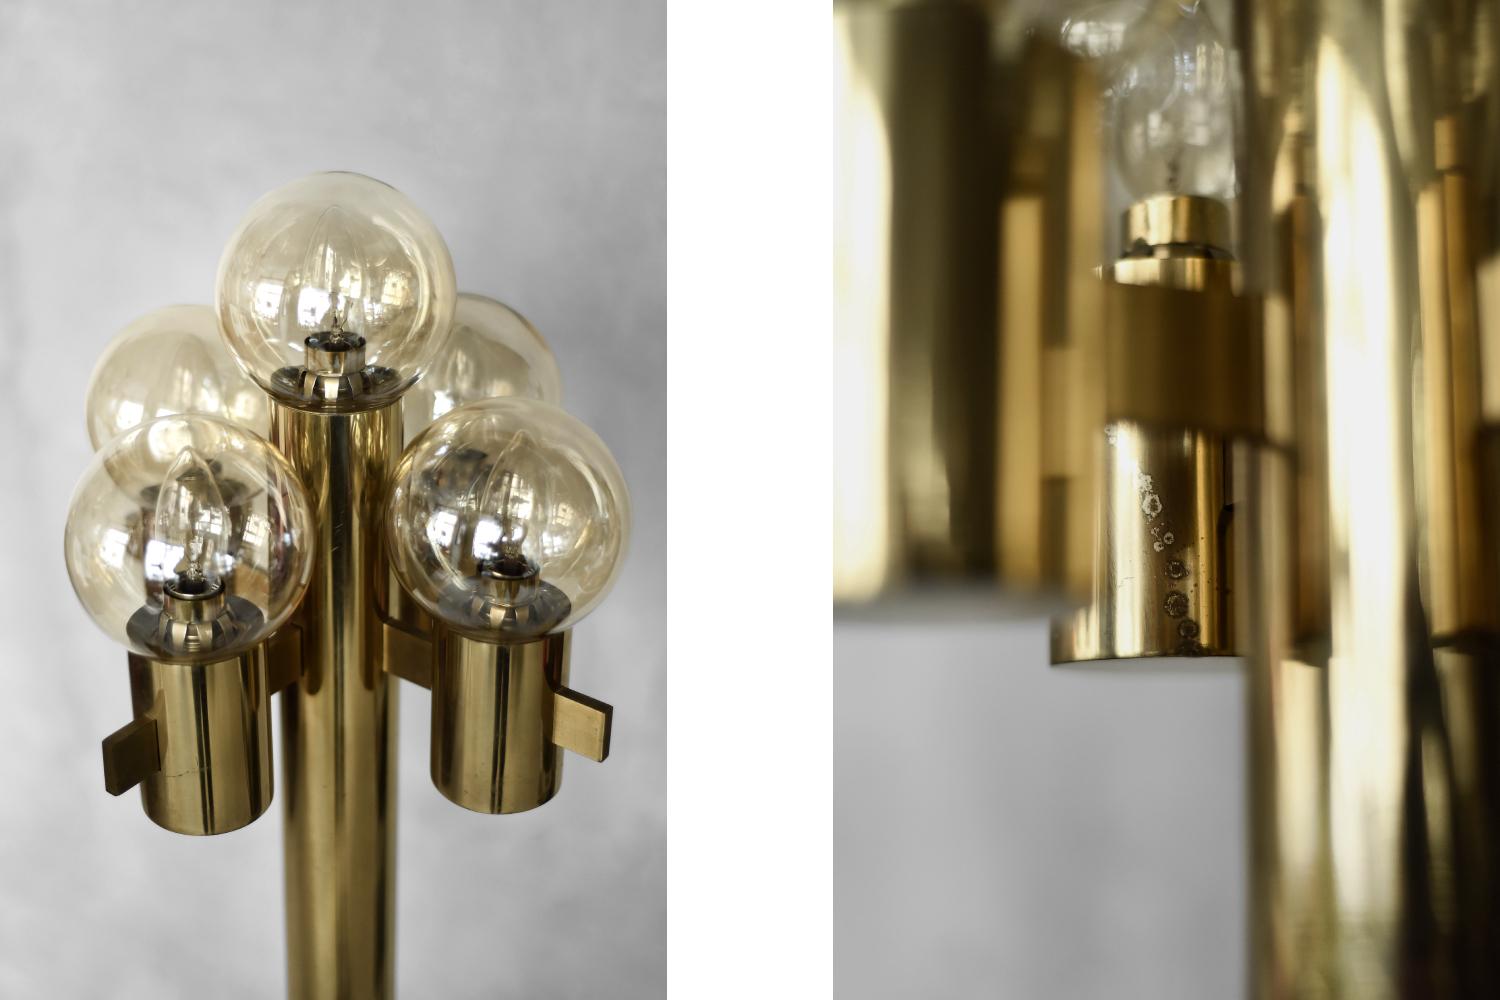 Italian Sculptural Gold Floor Lamp with Five Lights by Gaetano Sciolari, 1970s For Sale